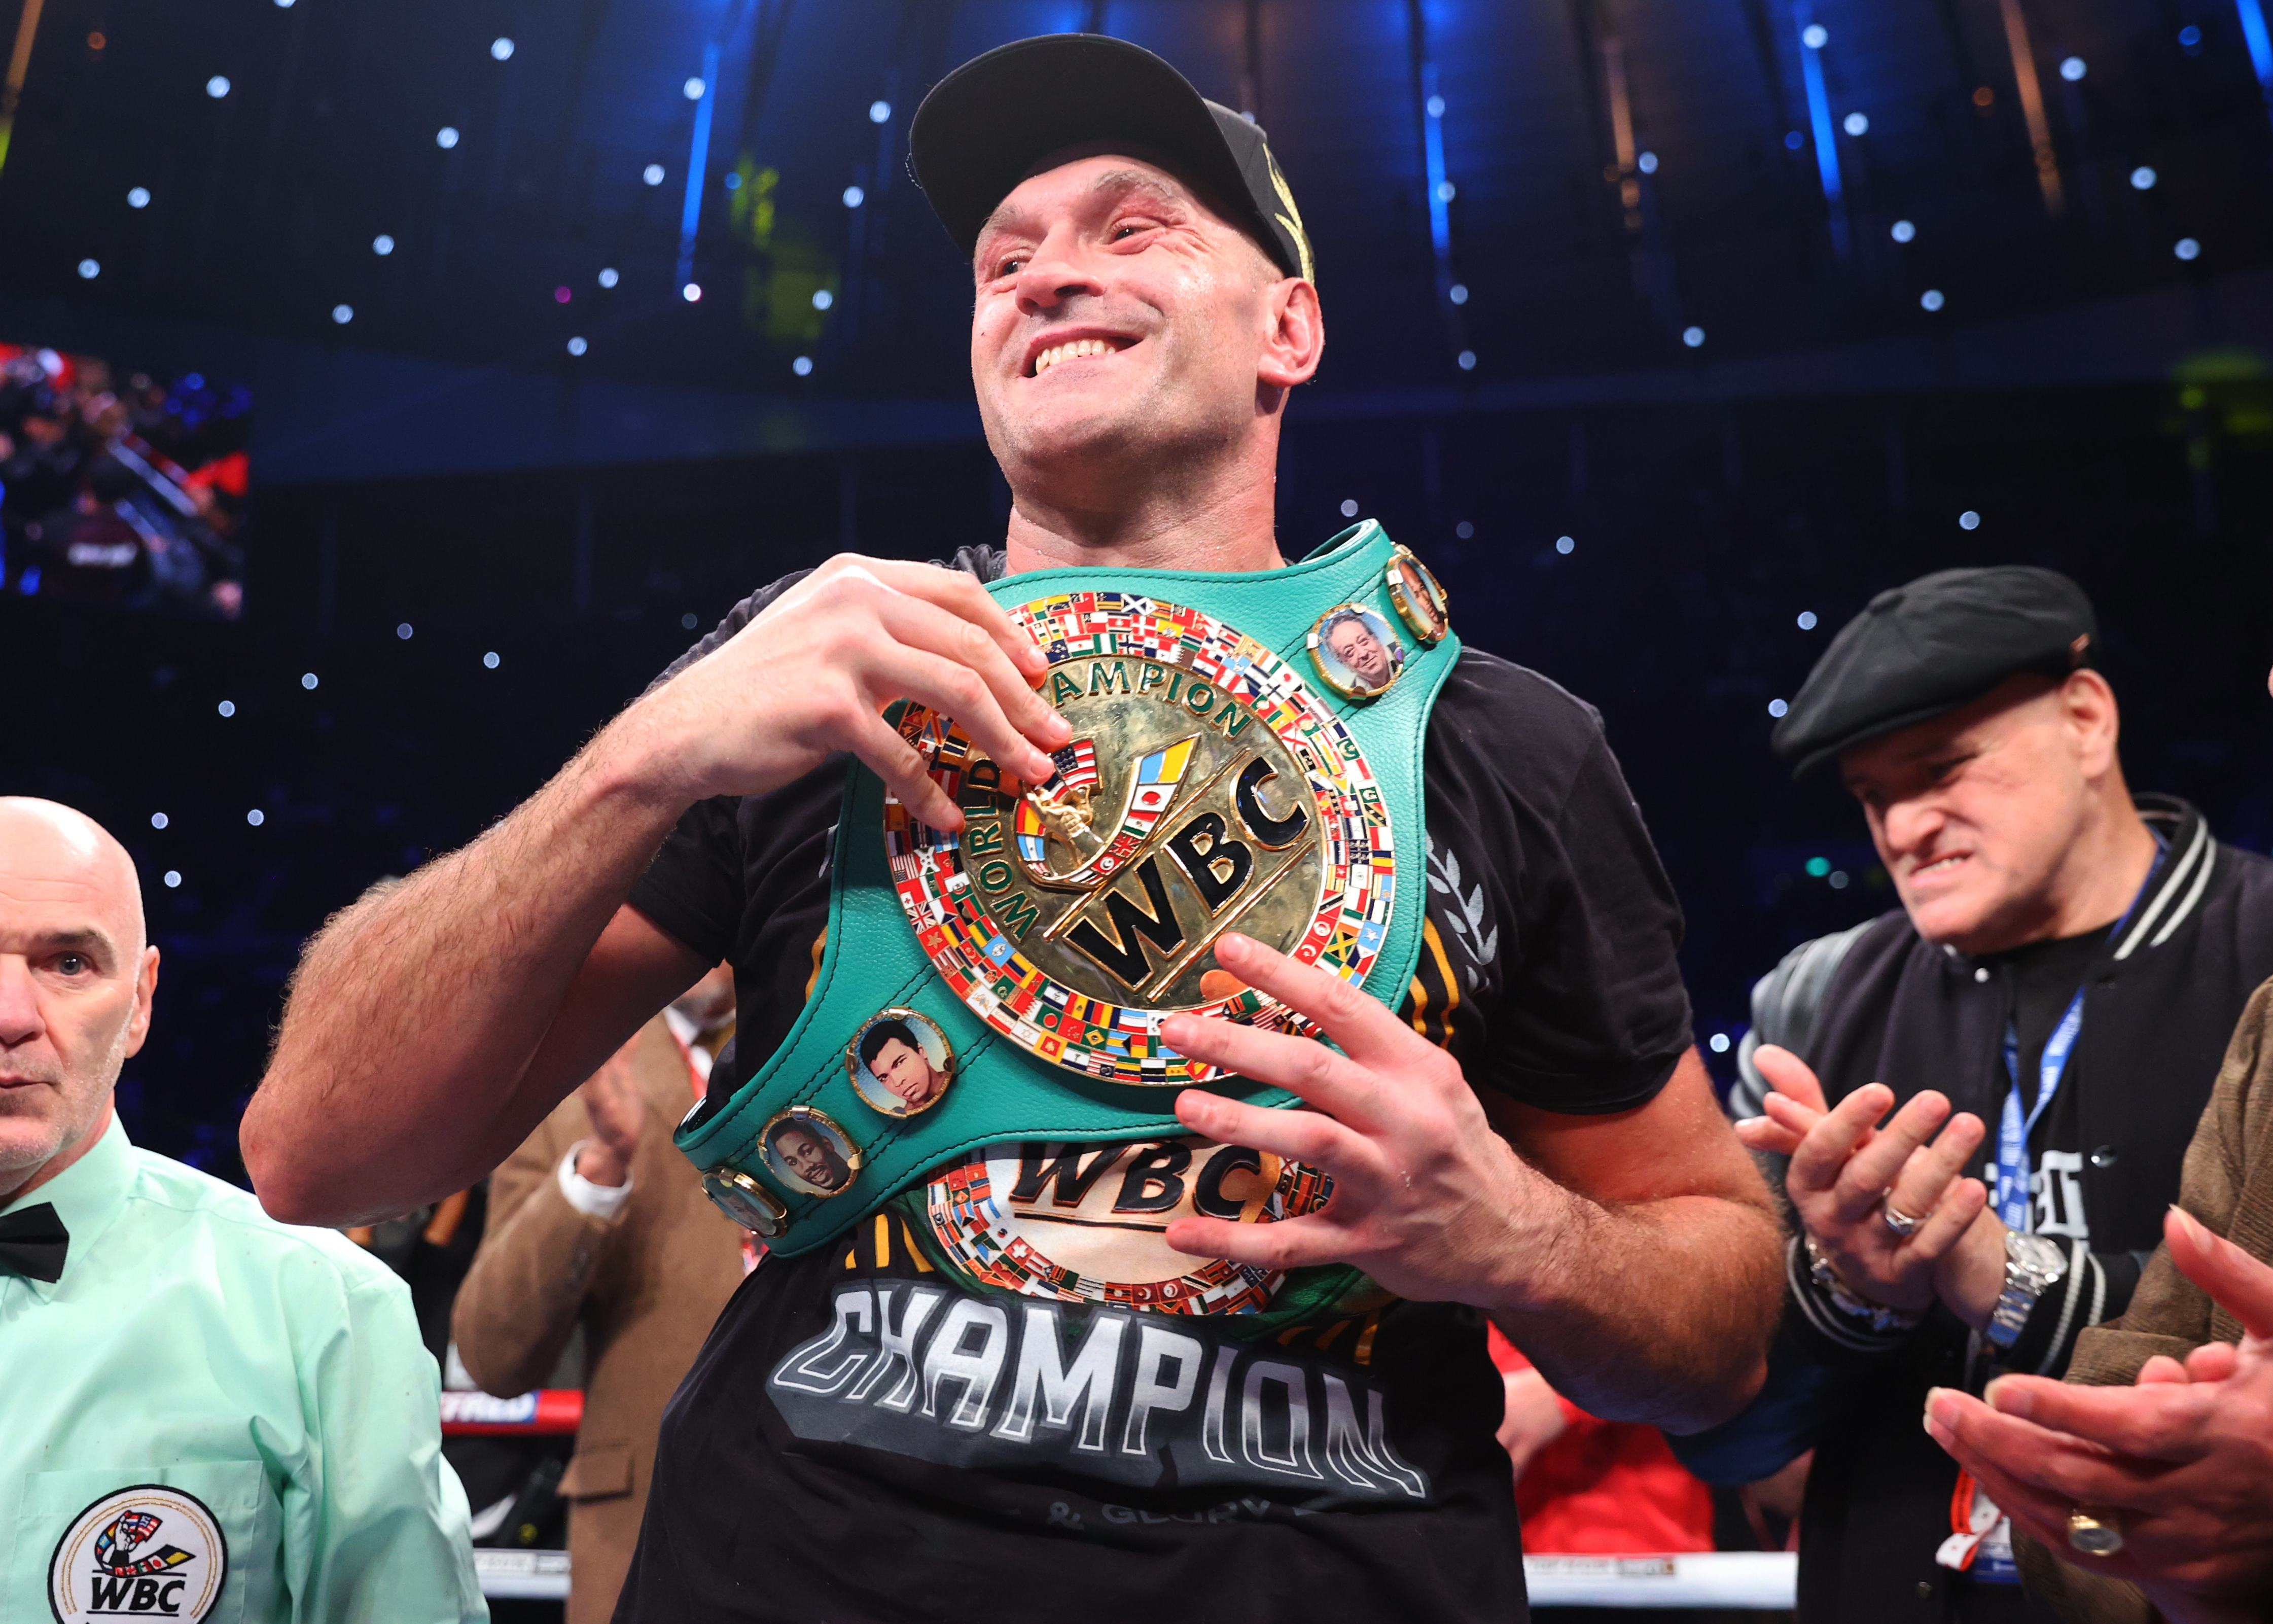 Tyson Fury won again, so what’s next? That and more on this week’s podcast!